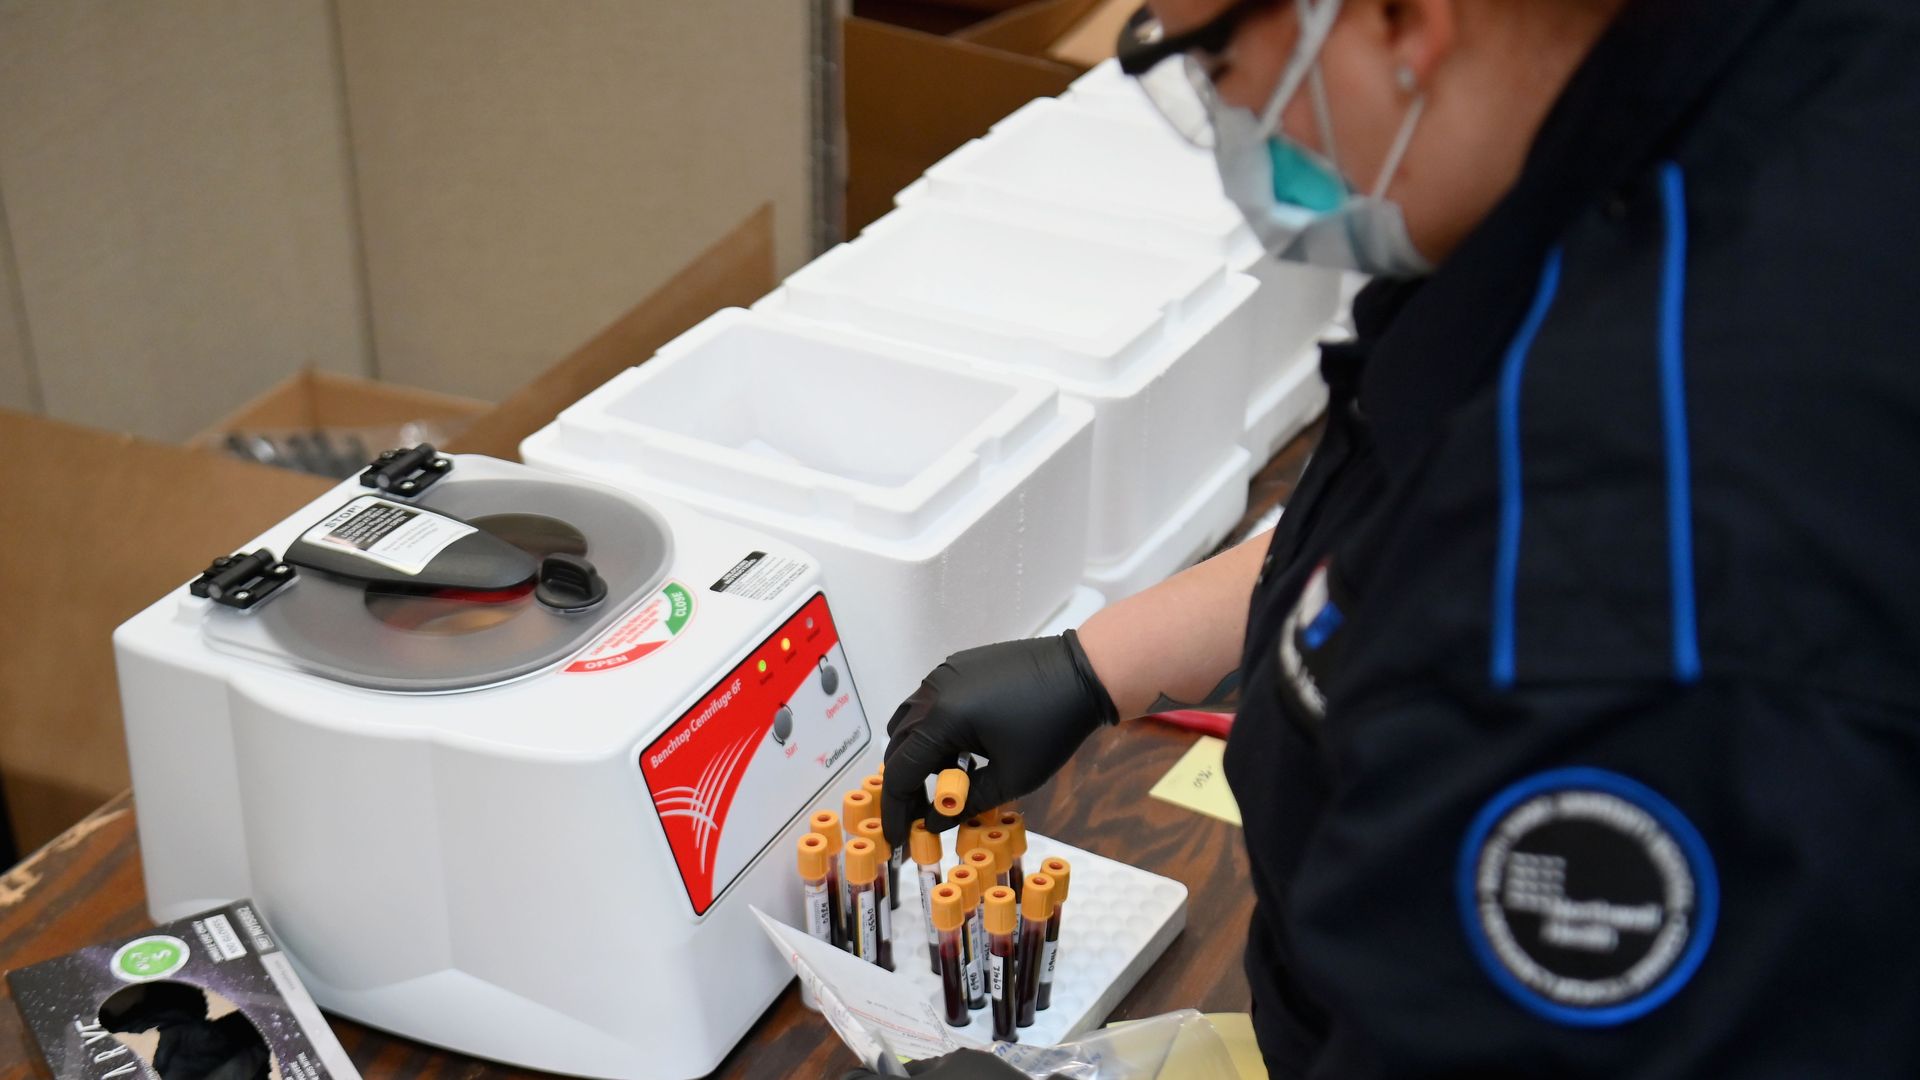 In this image, a woman medical worker handles vials of blood